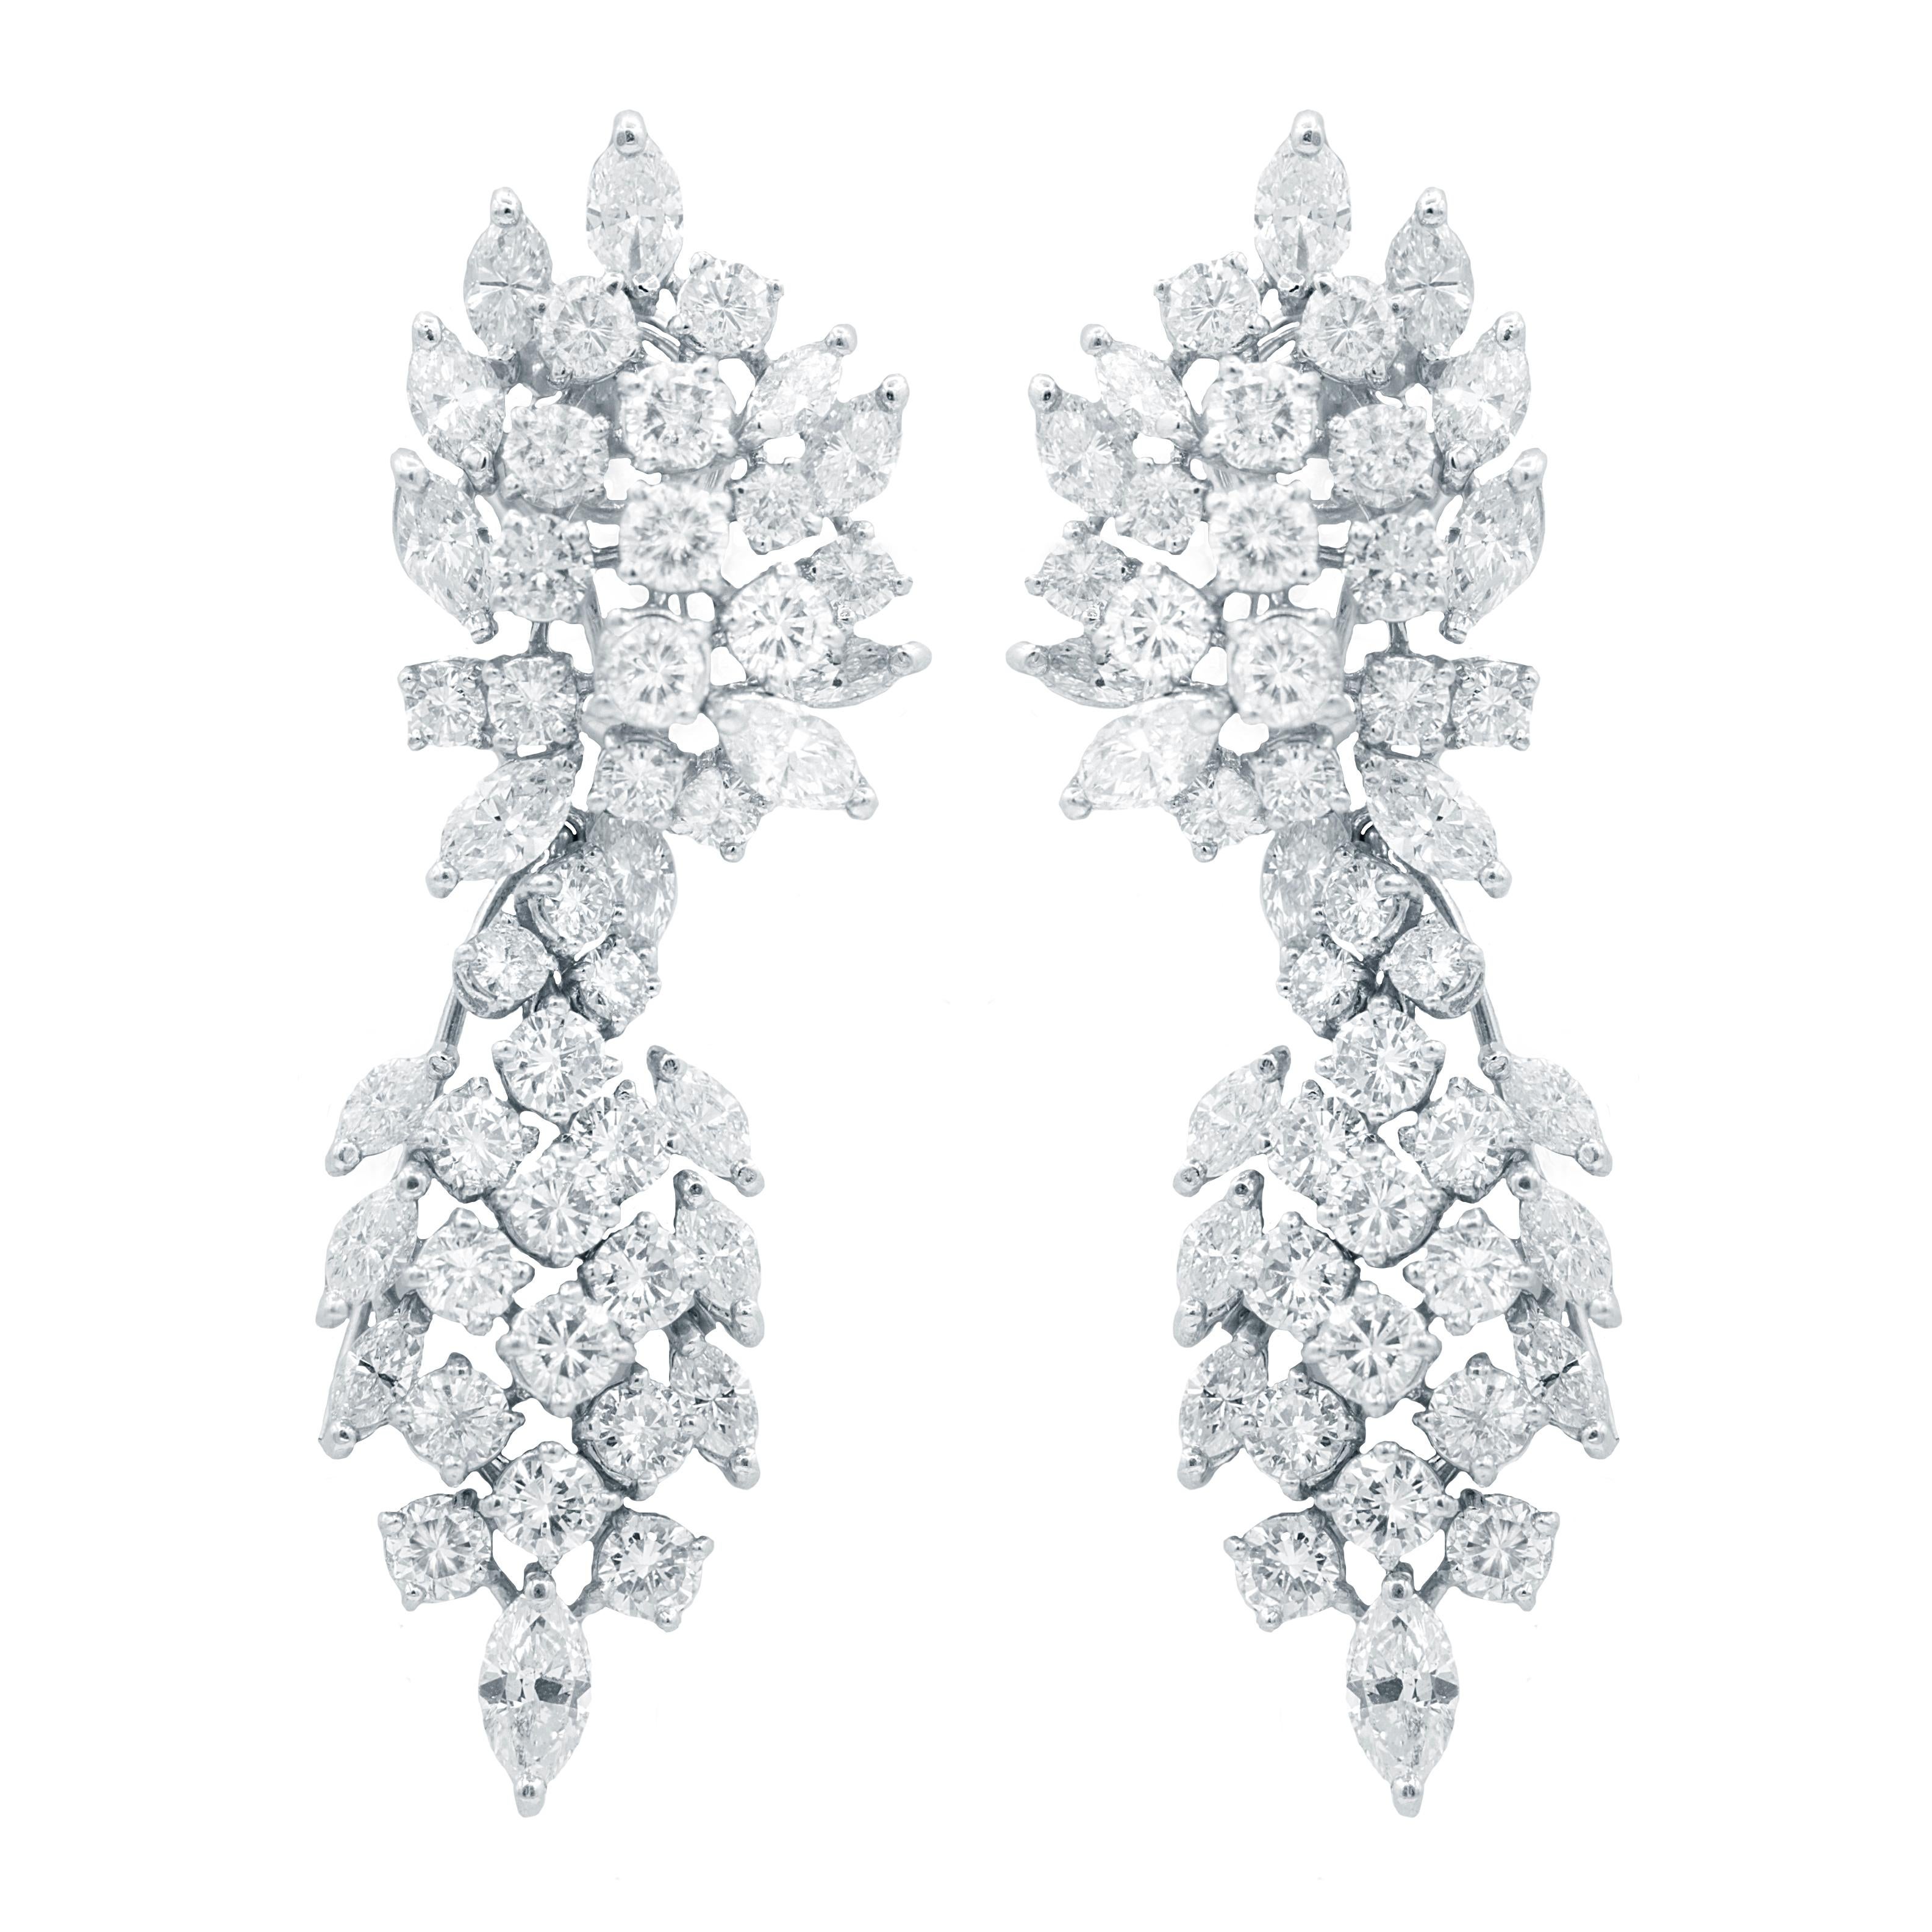 Mixed Cut 13.00 Carat Diamond Earrings with Deattachable Platinum For Sale